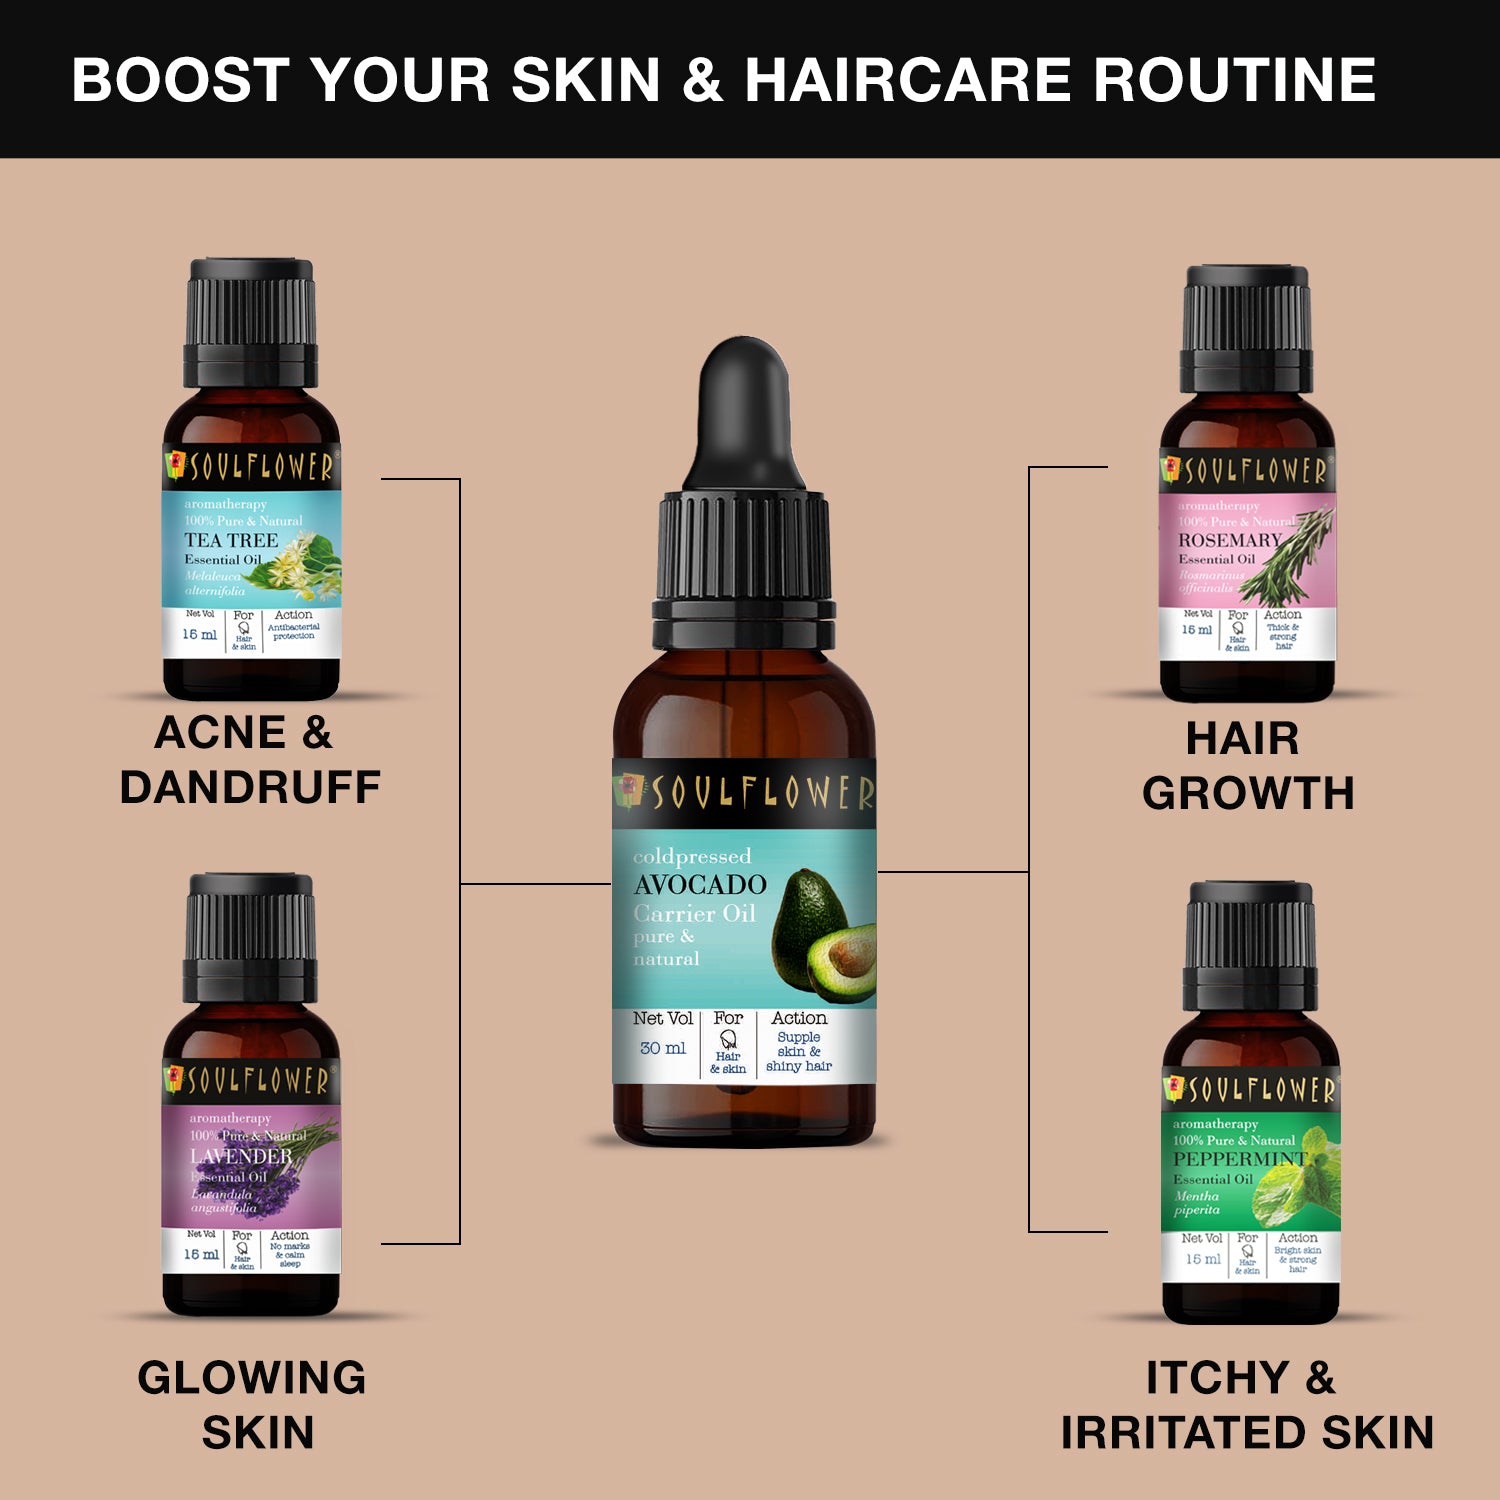 Boost your skin and haircare Routine